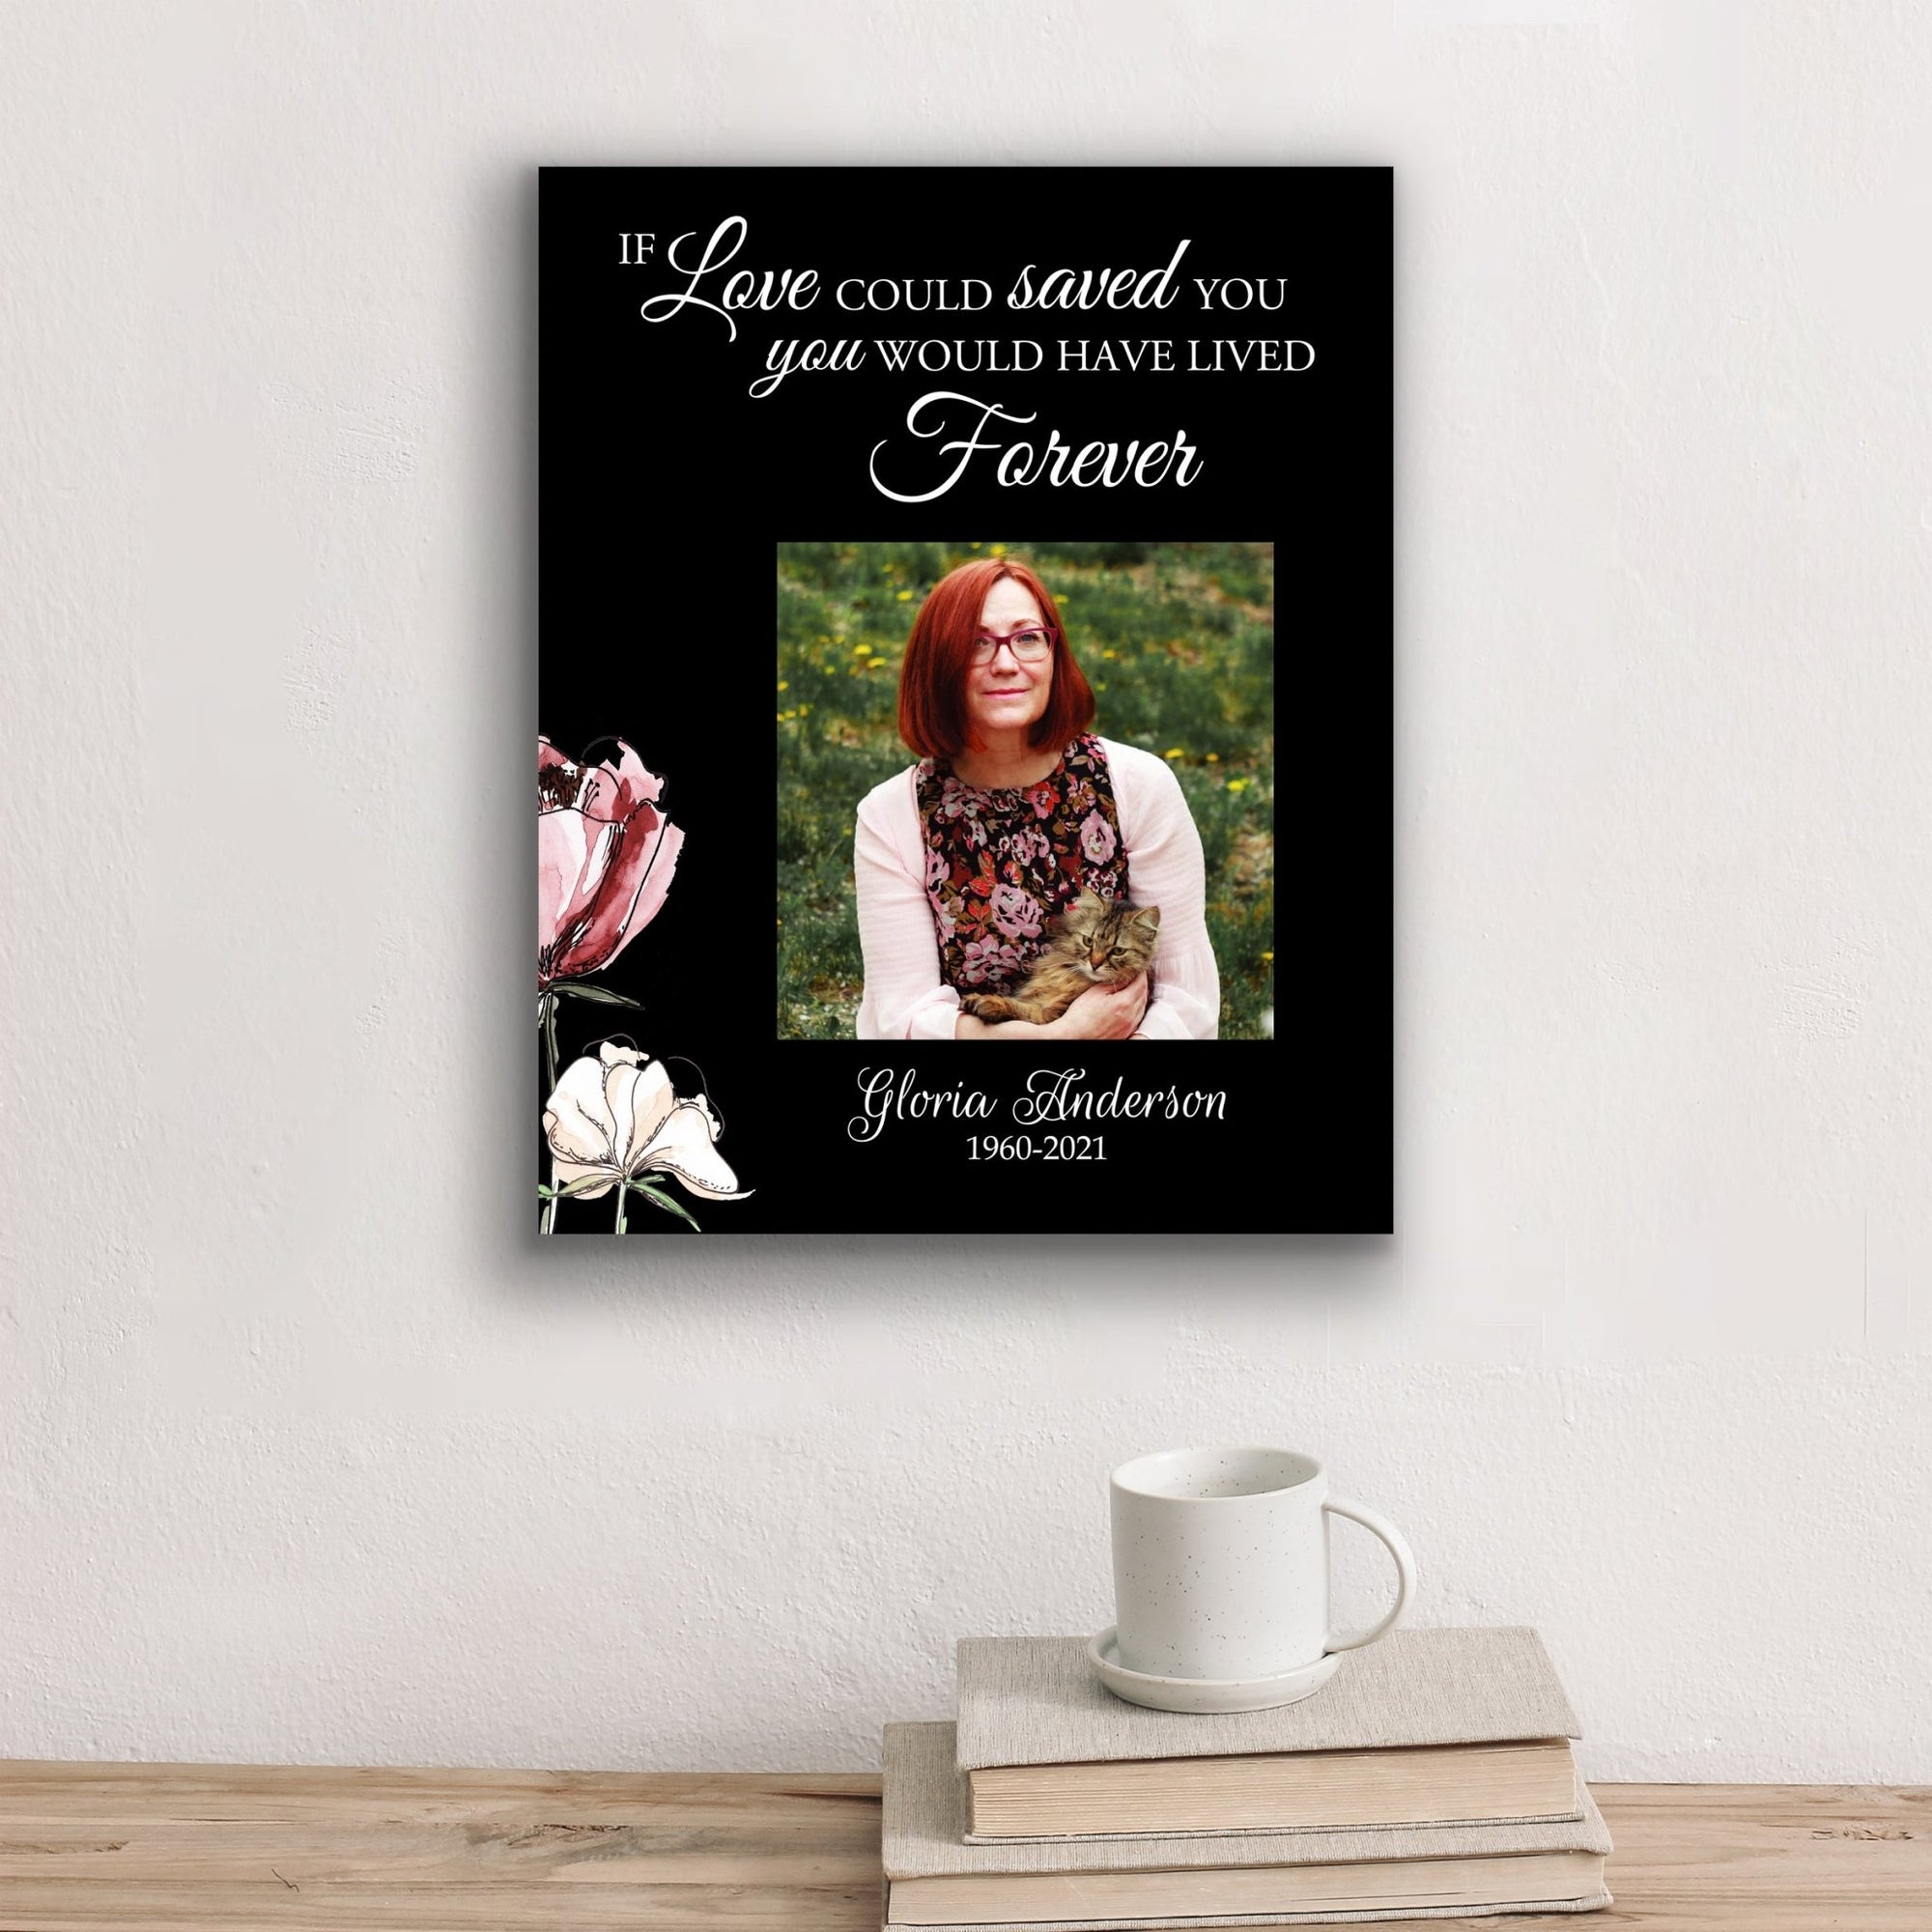 Personalized Human Memorial Black Photo & Inspirational Verse Bereavement Wall Décor & Sympathy Gift Ideas - If Love Could Saved - LifeSong Milestones